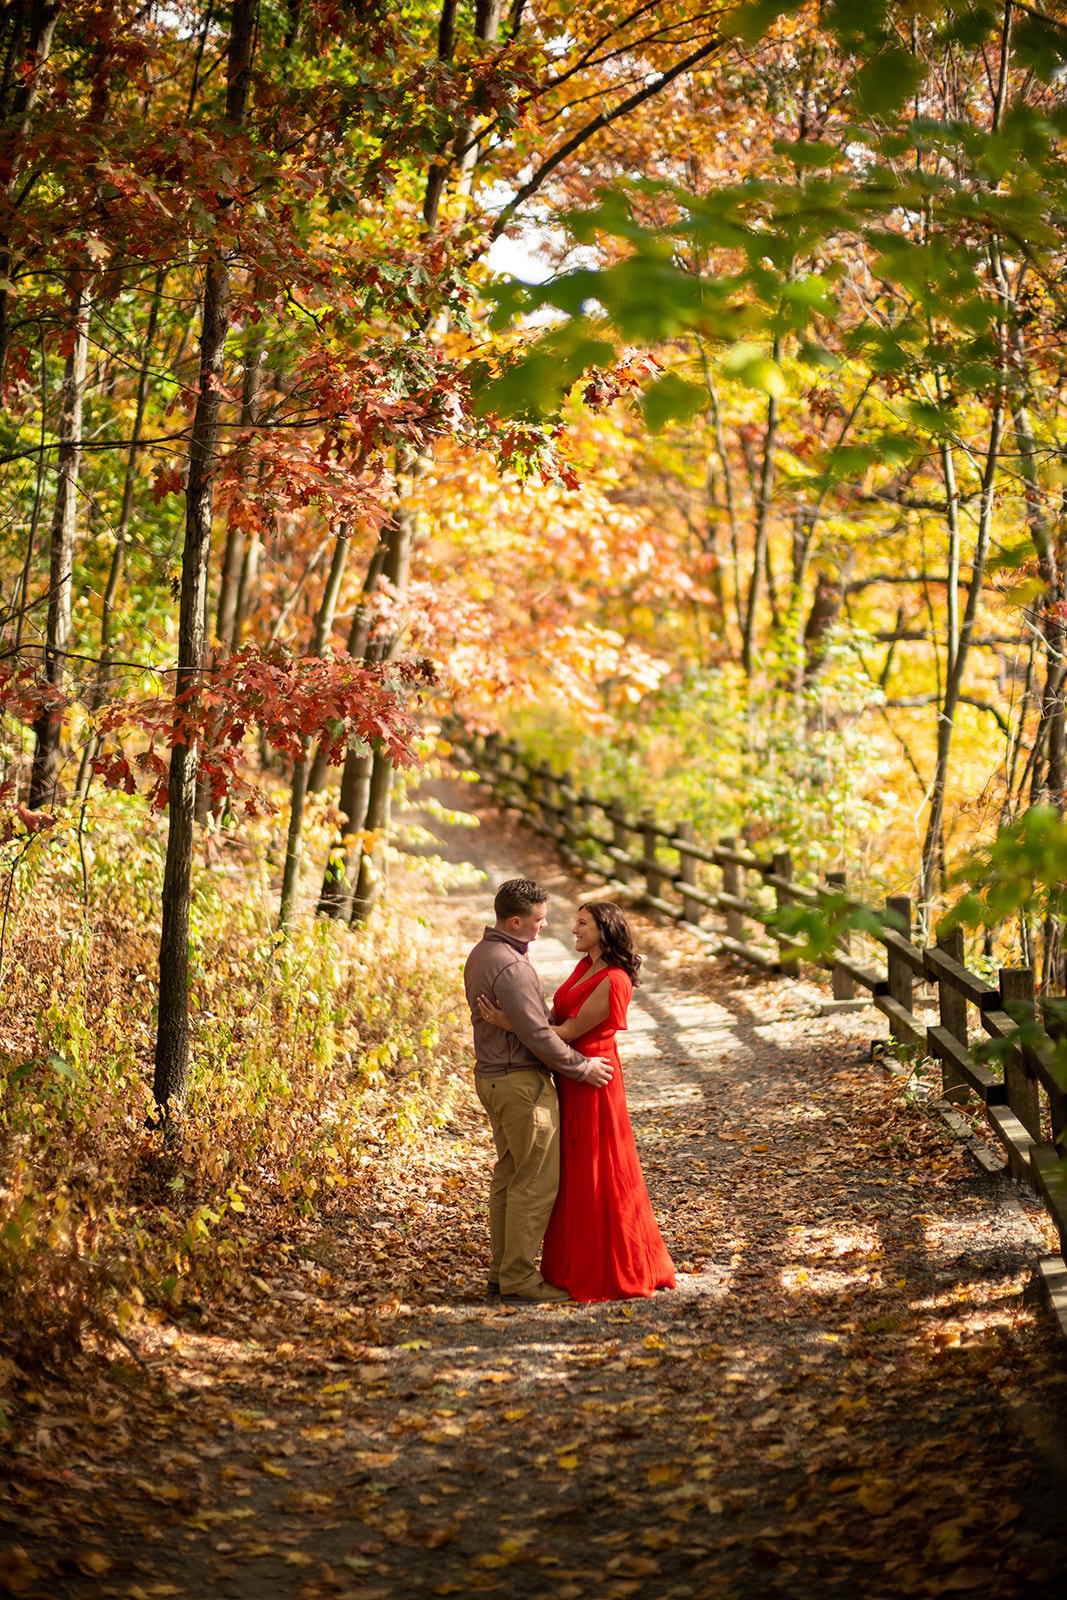 Intimate moment of couple kissing in serene nay aug park, showcasing natural engagement photography.